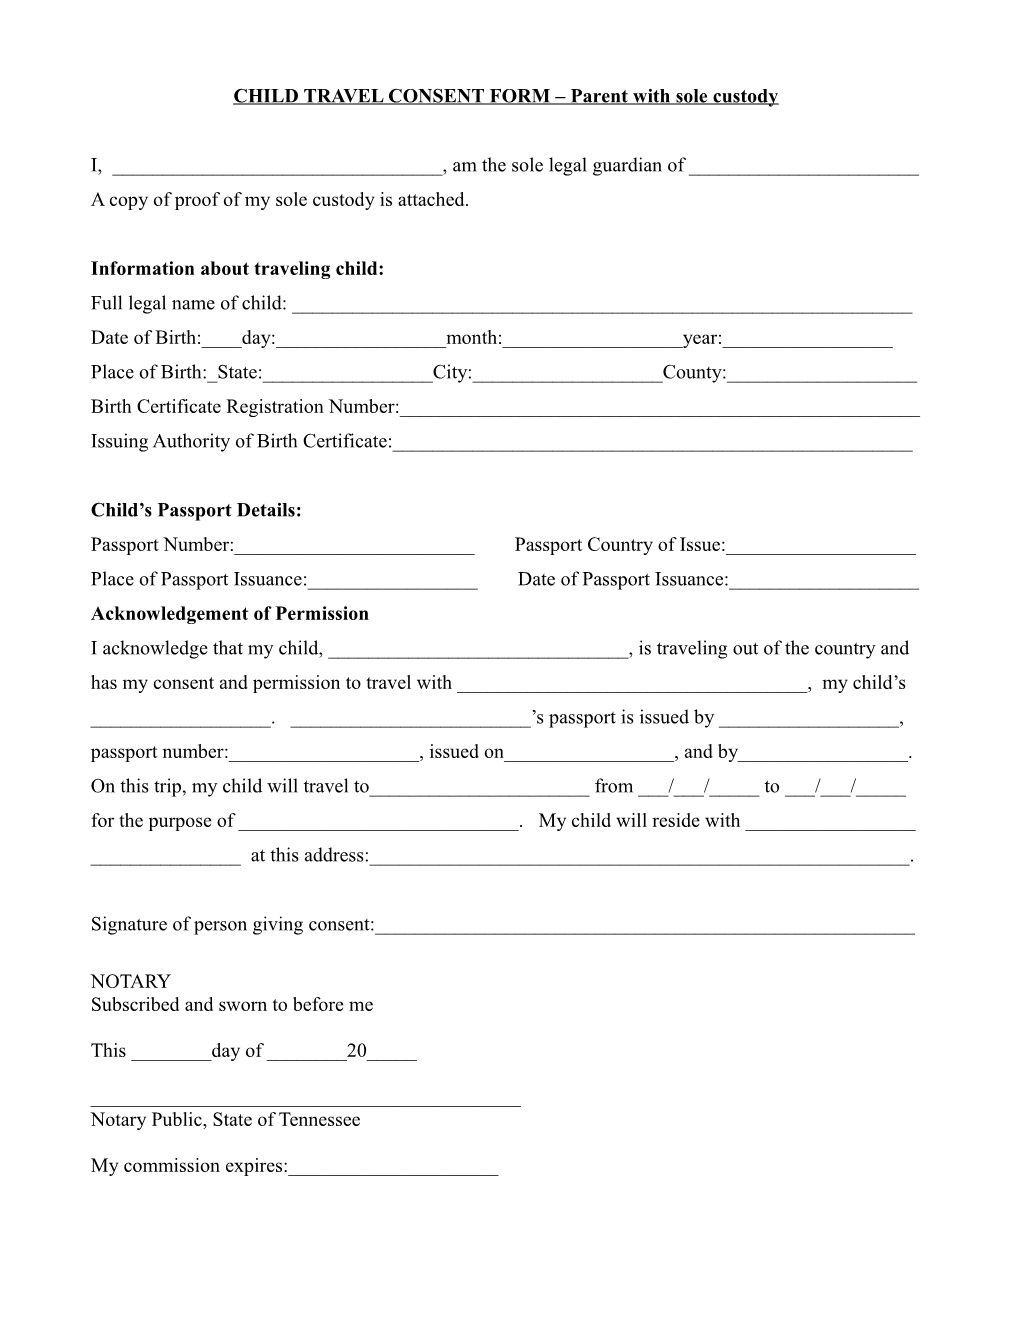 CHILD TRAVEL CONSENT FORM Parent with Sole Custody